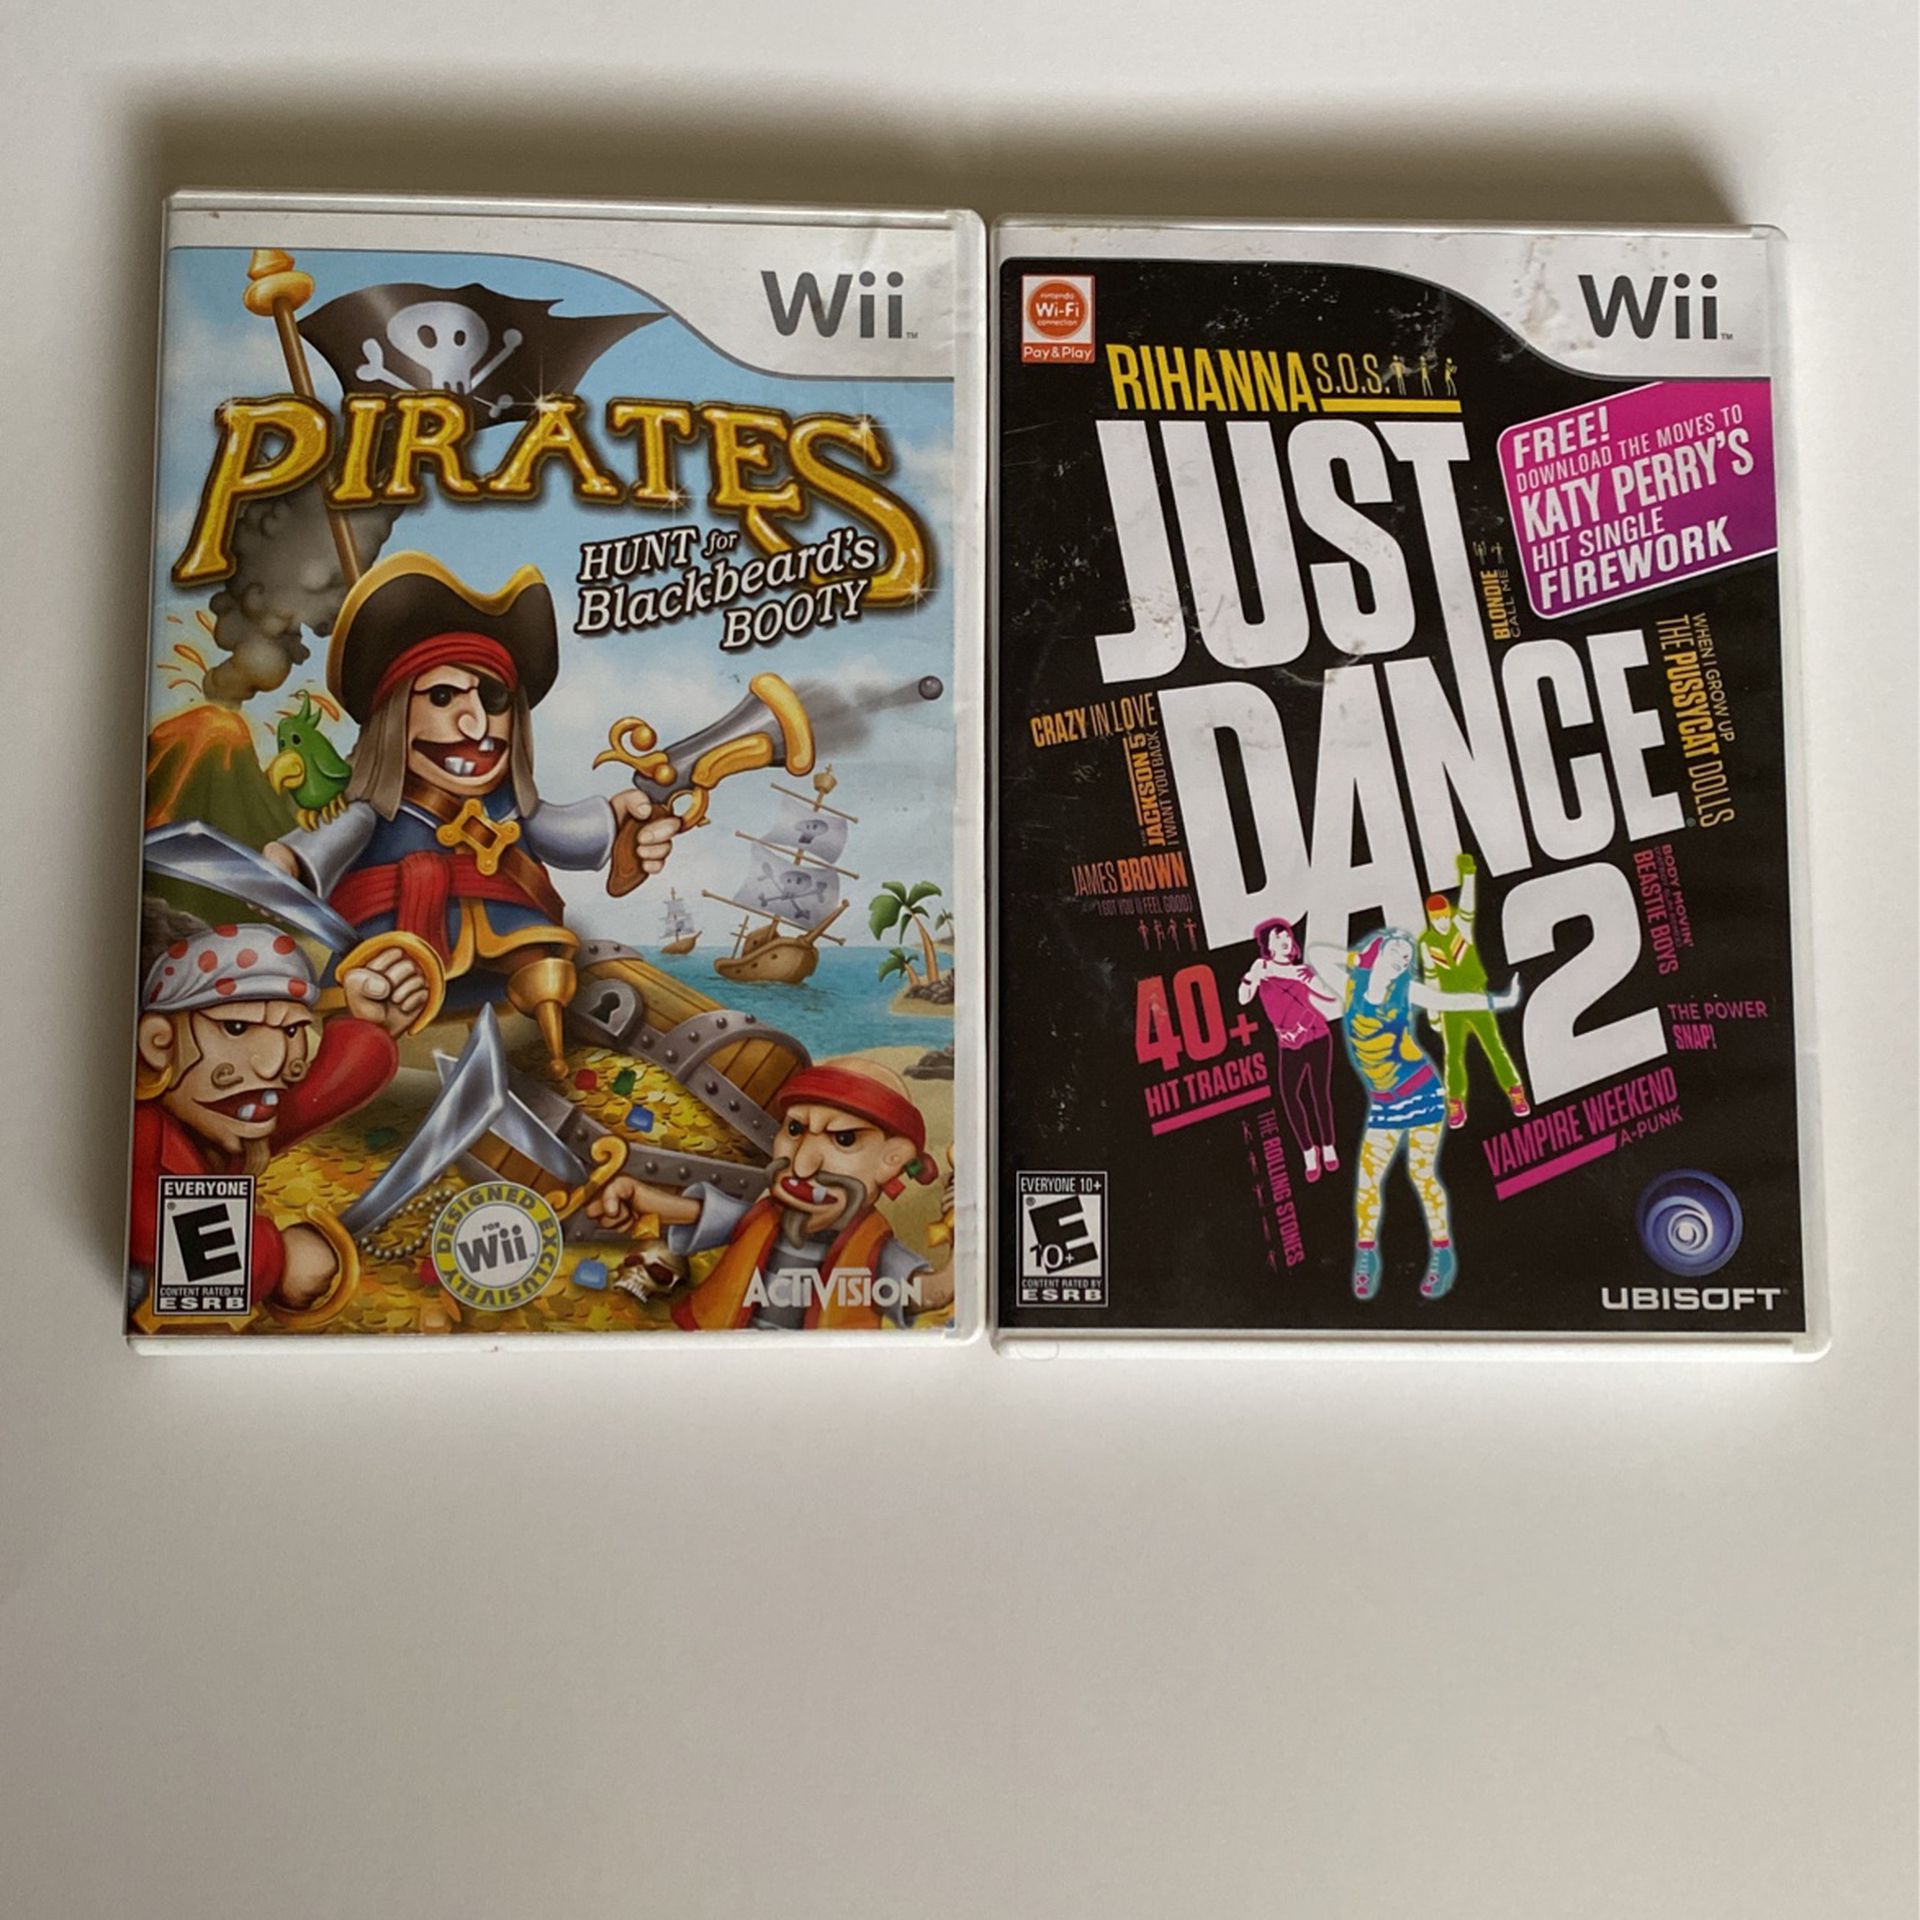 Wii Just Dance 2 & Pirates Hunt For Blackbeards Booty